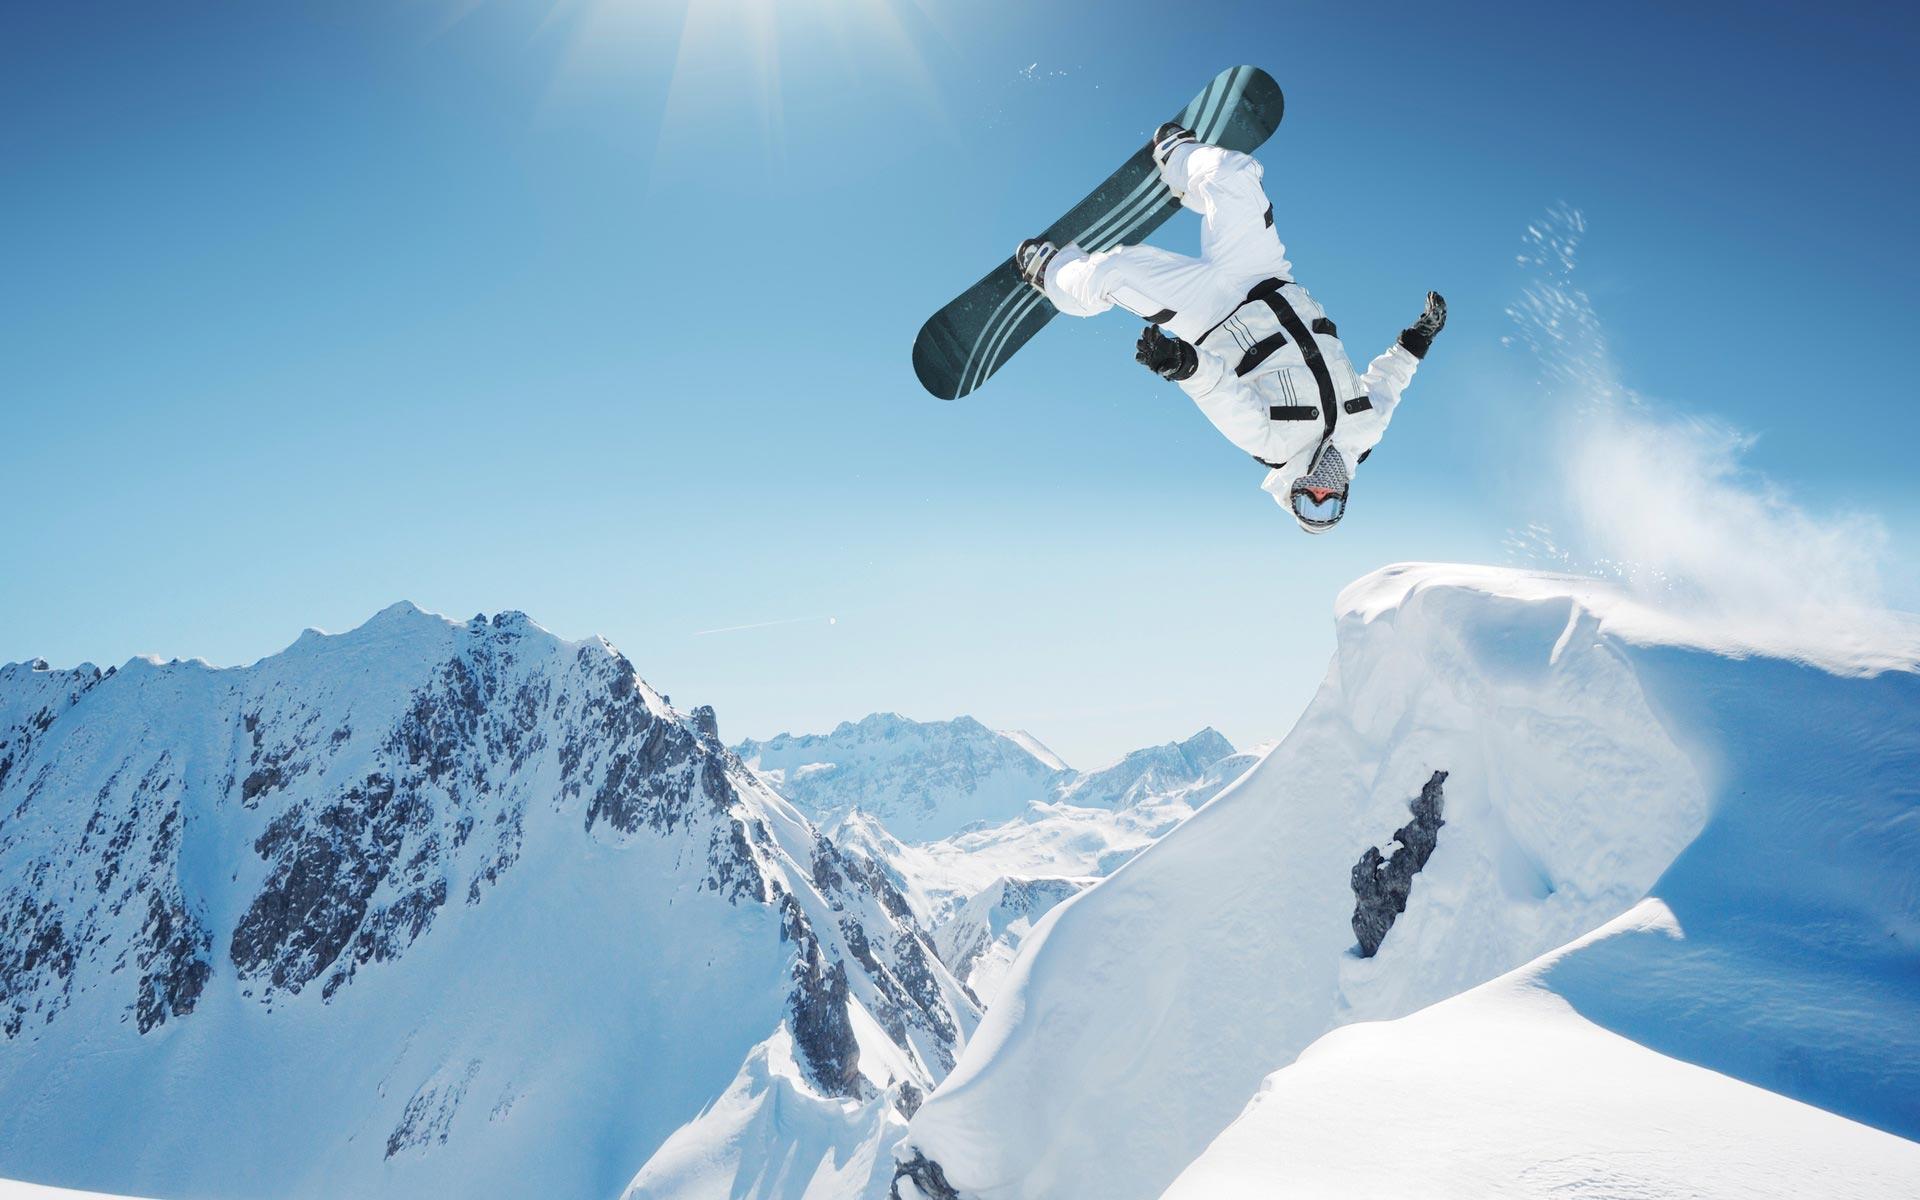 Snowboarding Wallpaper HD Picture 5 HD Wallpaper. Hdimges